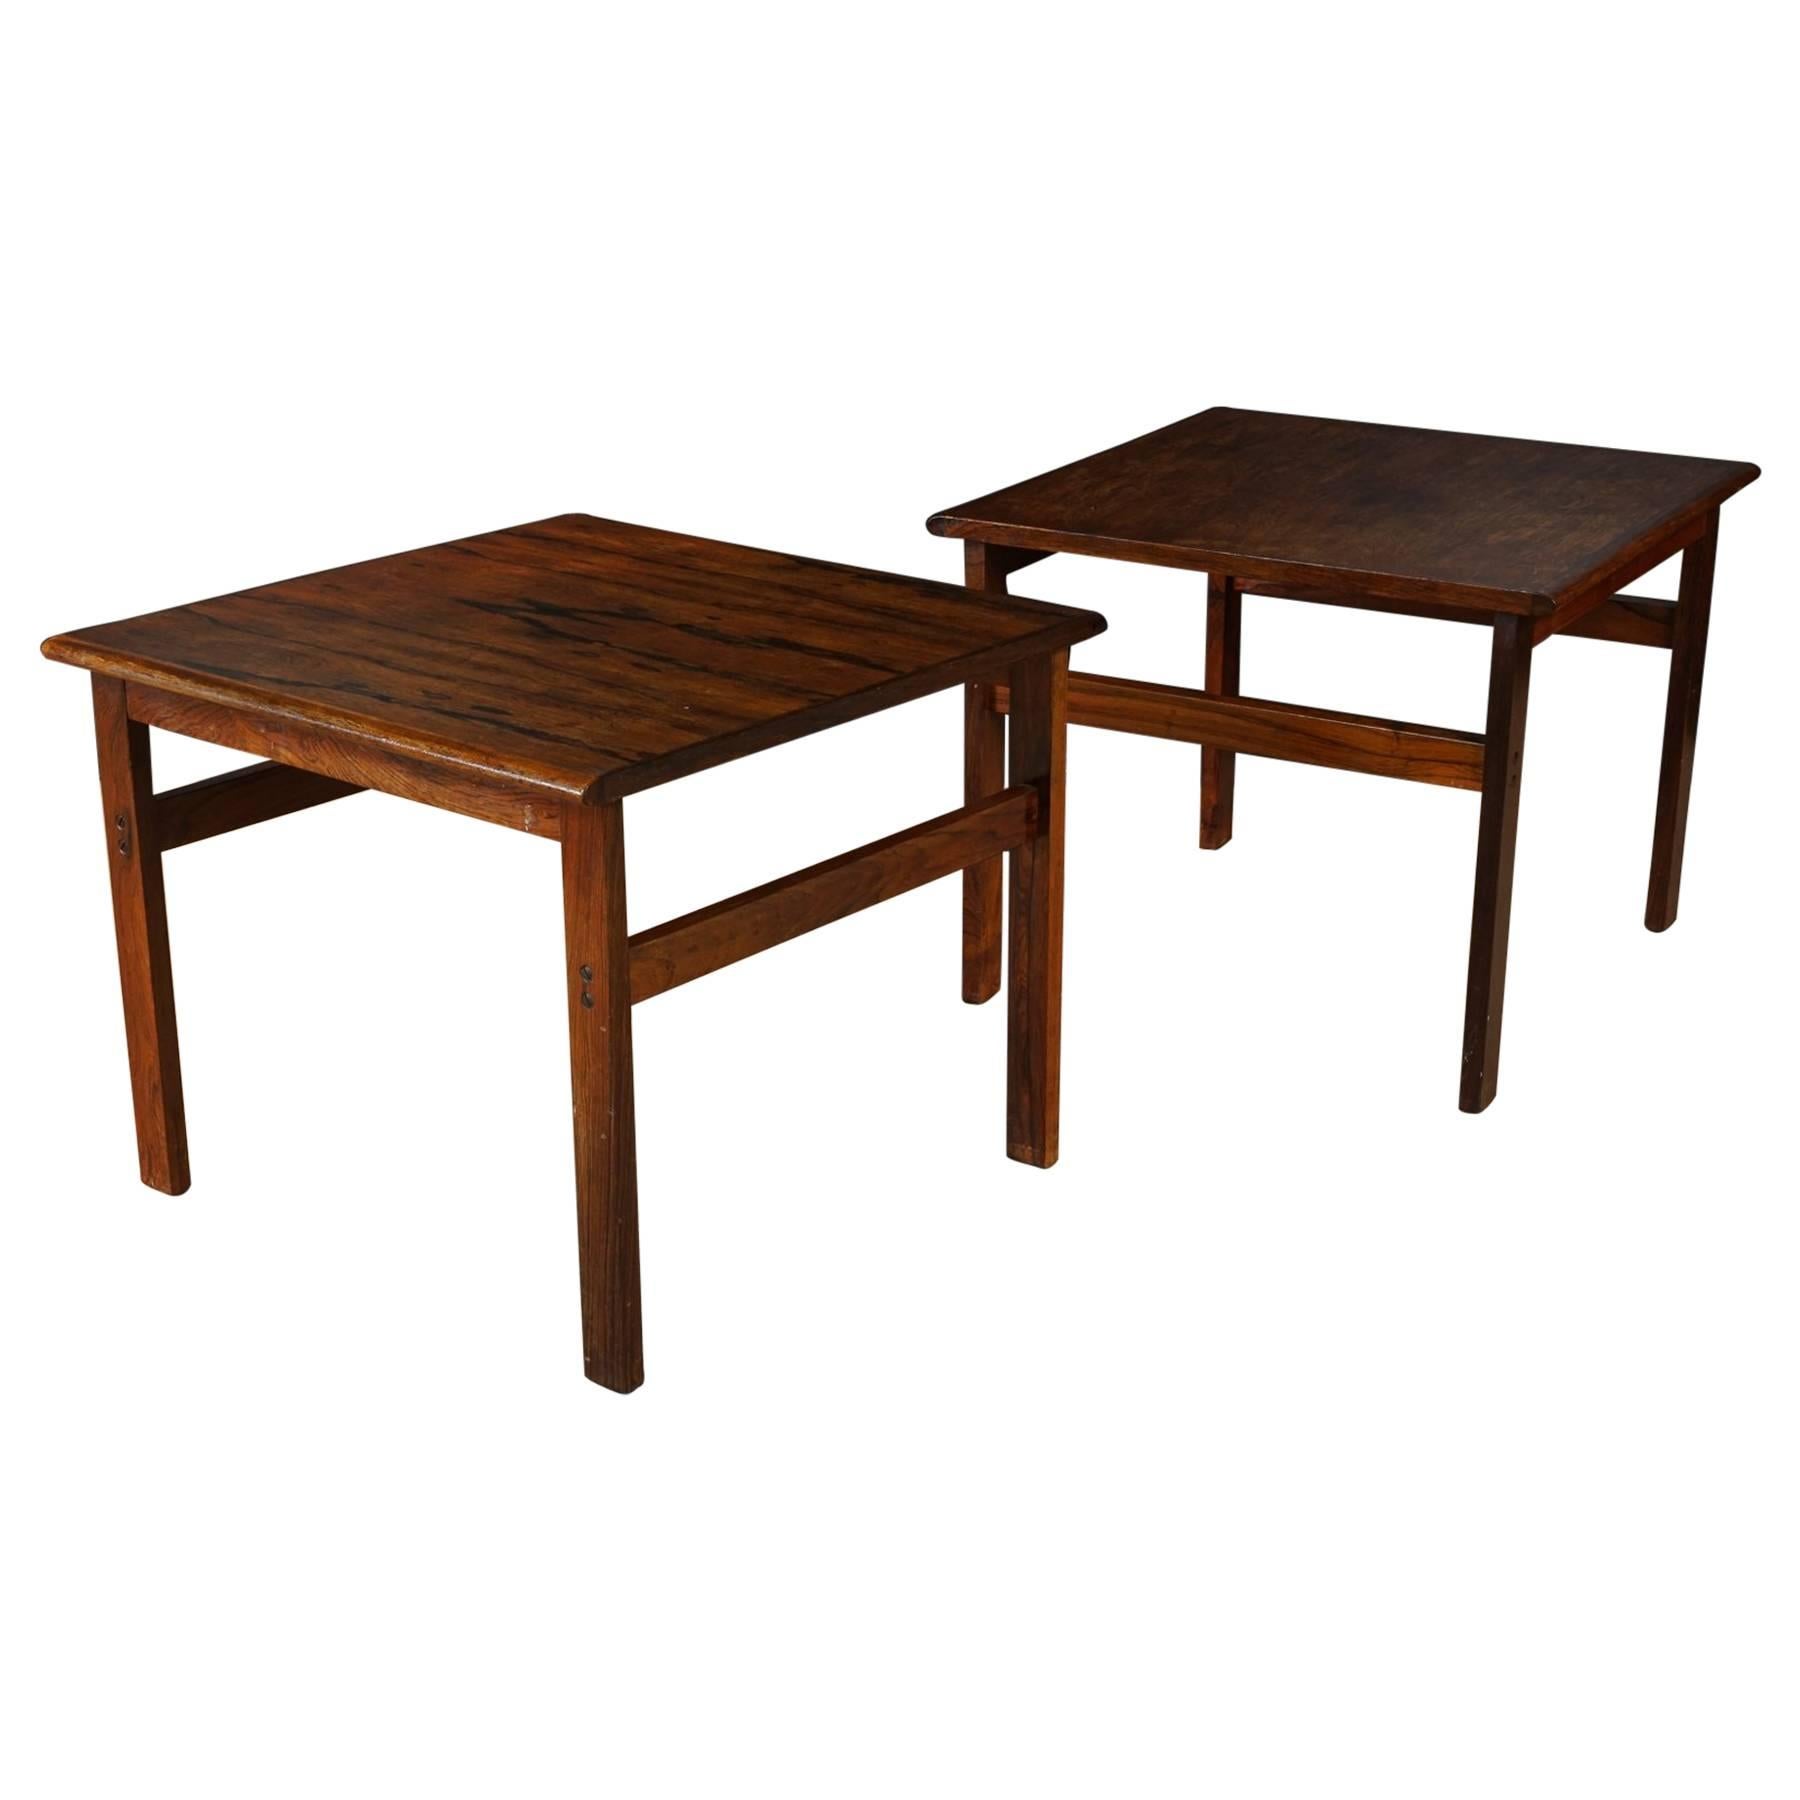 Pair of Rosewood Side Tables from Denmark, circa 1960